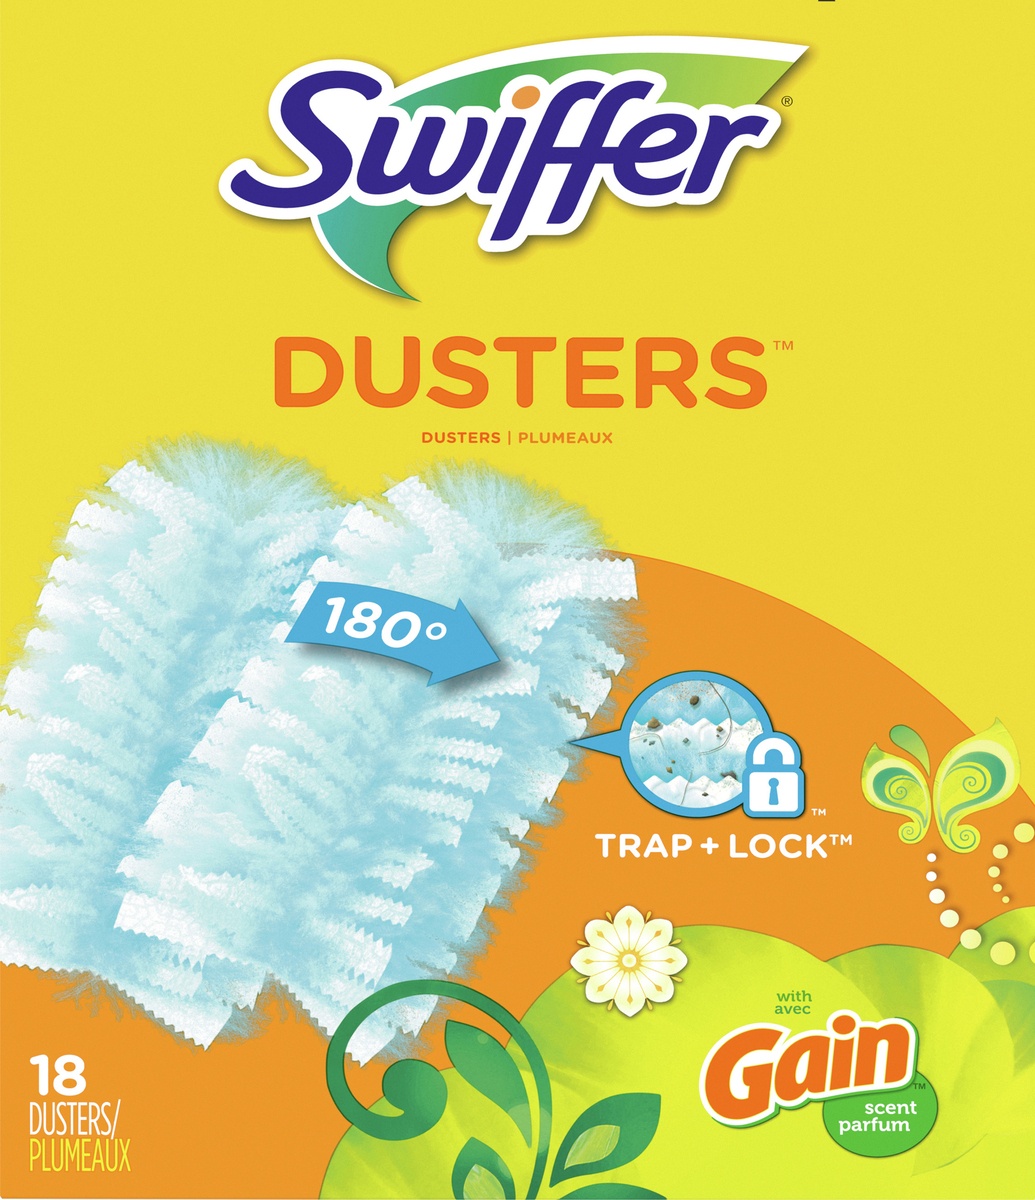 slide 5 of 6, Swiffer Gain Scent Dusters 18 ea, 18 ct